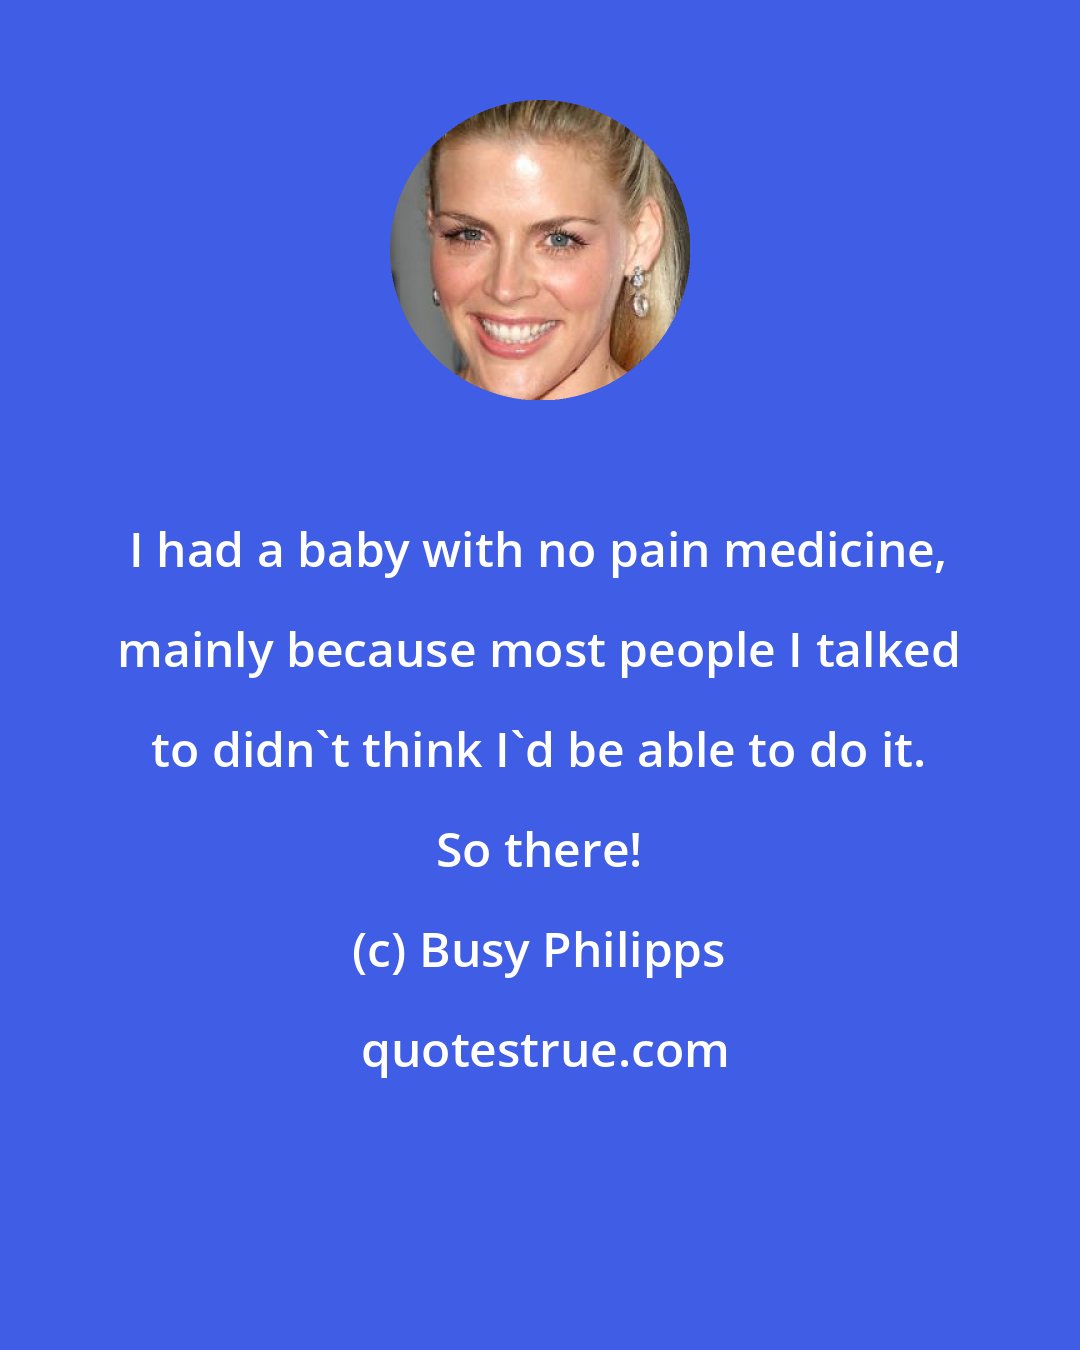 Busy Philipps: I had a baby with no pain medicine, mainly because most people I talked to didn't think I'd be able to do it. So there!